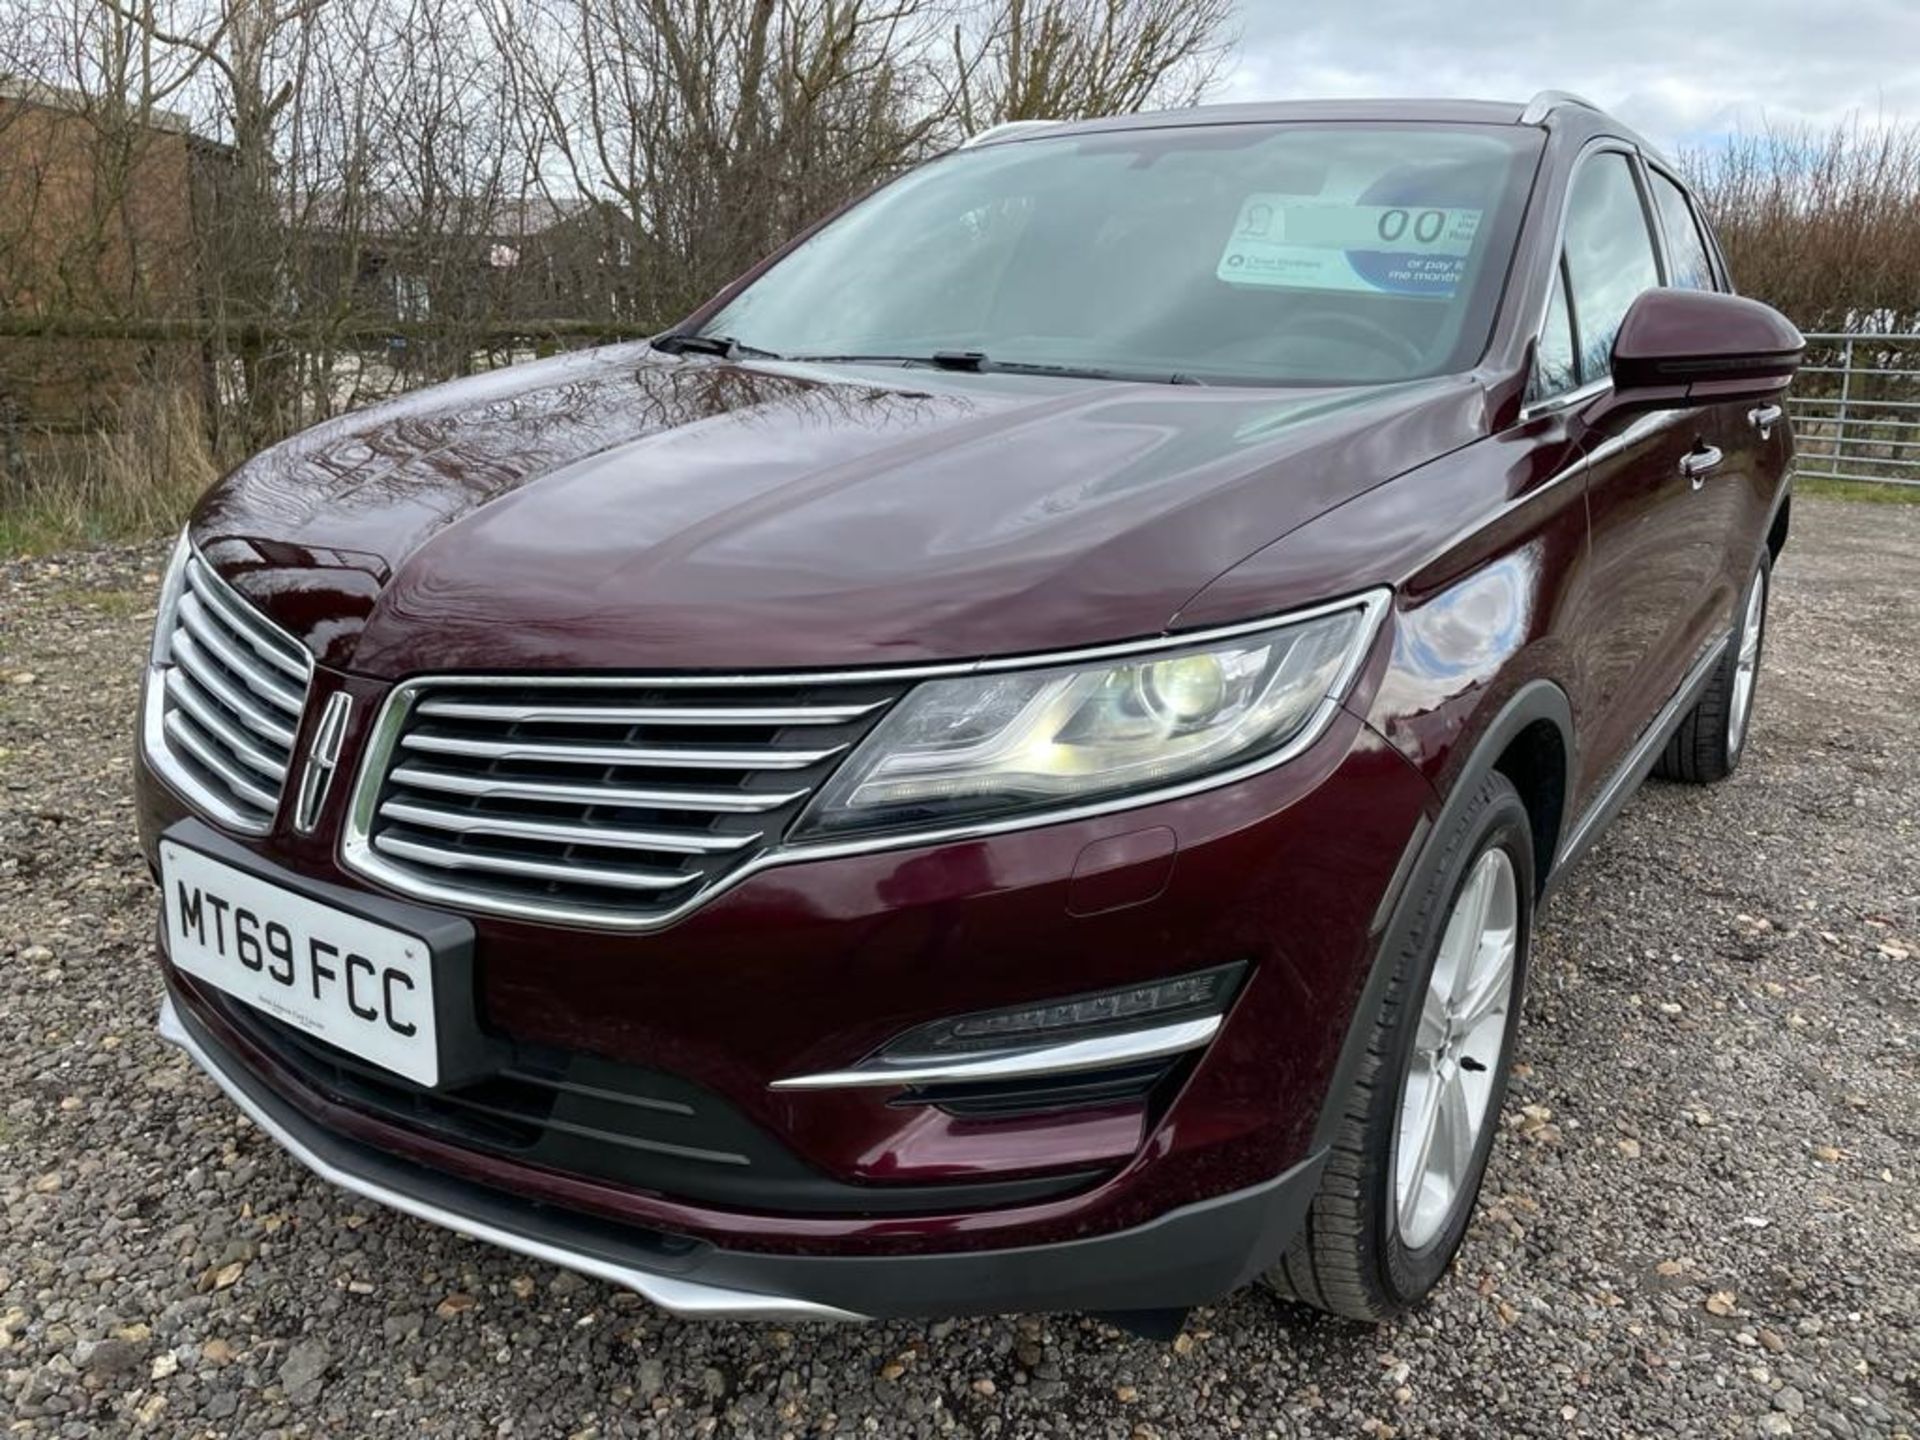 69 PLATE, PRE-REGISTERED 2017MY, LINCOLN MKC PREMIER 2.0L TURBO PETROL ECOBOOST (200bhp) AUTOMATIC - Image 3 of 14